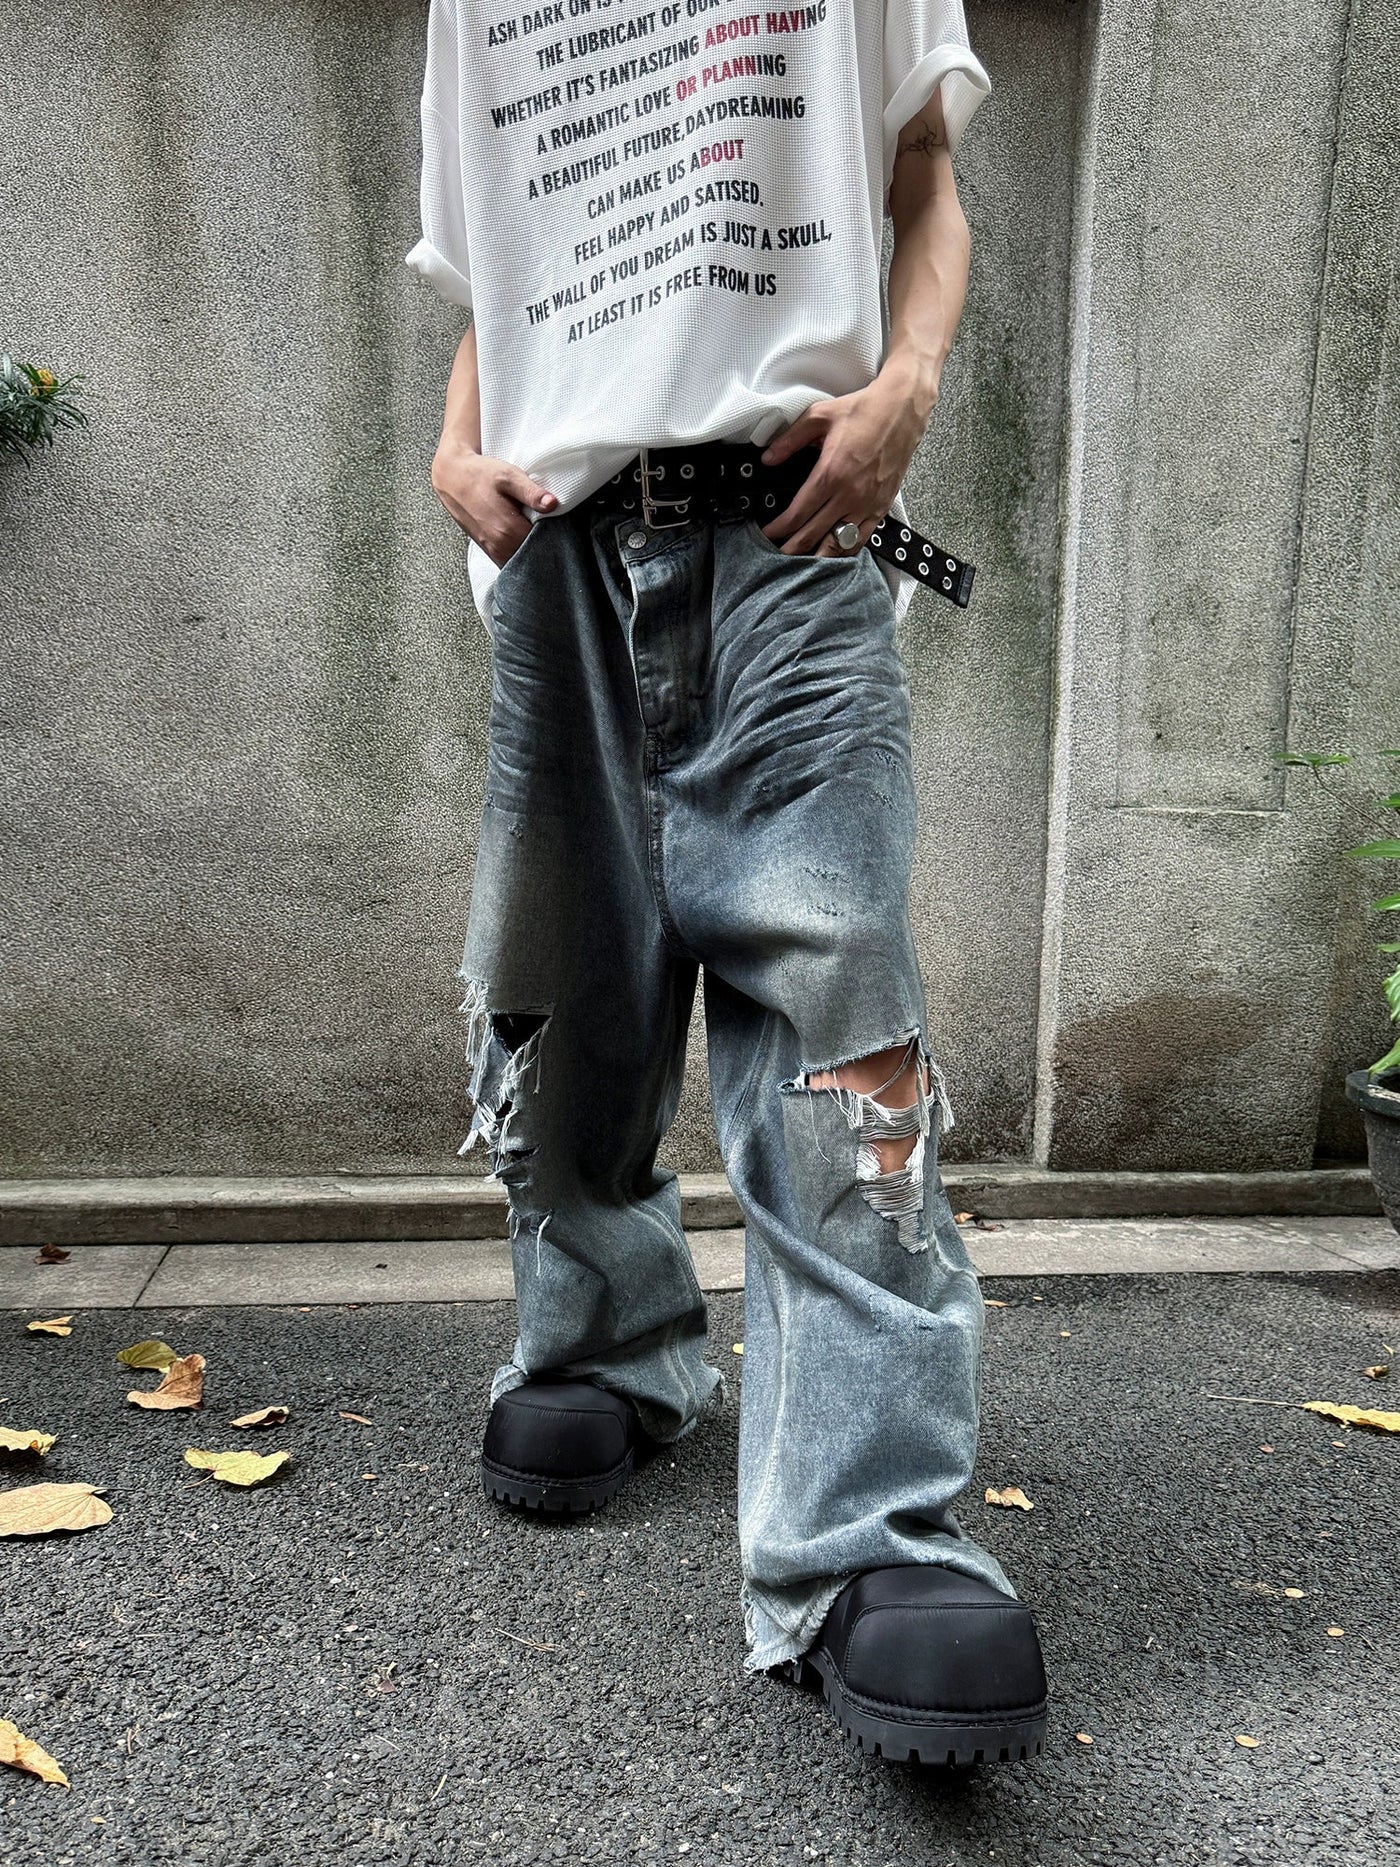 Mud-Dyed Baggy Ripped Jeans Korean Street Fashion Jeans By Ash Dark Shop Online at OH Vault